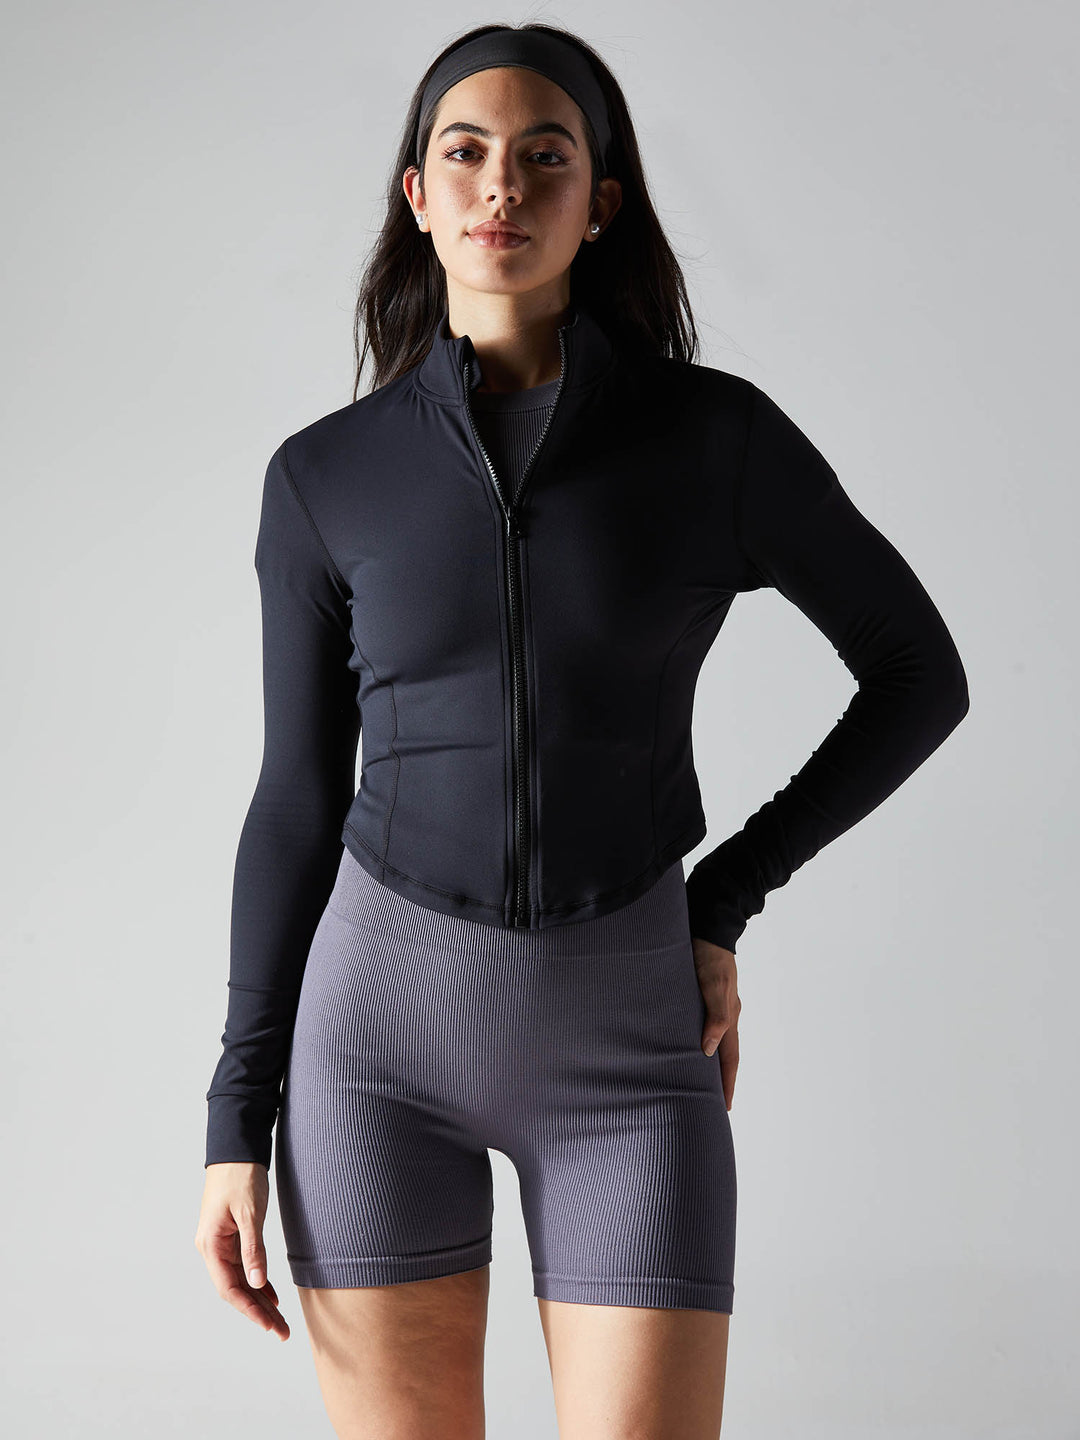 Shop from the Women only on CAVA athleisure – CAVA Athleisure Pvt Ltd